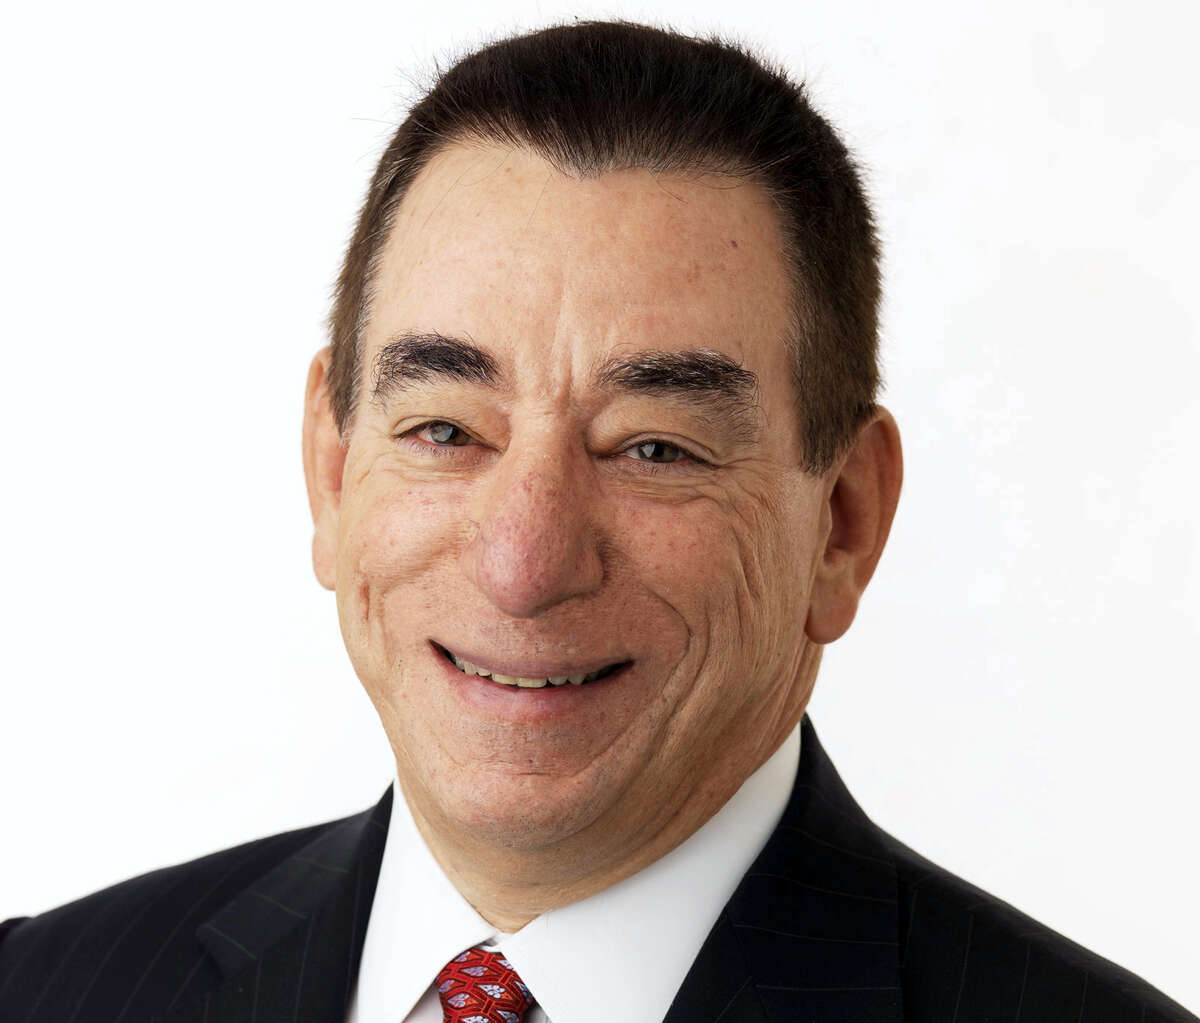 FILE - This undated file photo provided by Regeneron Pharmaceuticals shows company CEO Leonard Schleifer. Schleifer was one of the highest paid CEOs in 2016, according to a study carried out by executive compensation data firm Equilar and The Associated Press. (Regeneron Pharmaceuticals via AP, File)